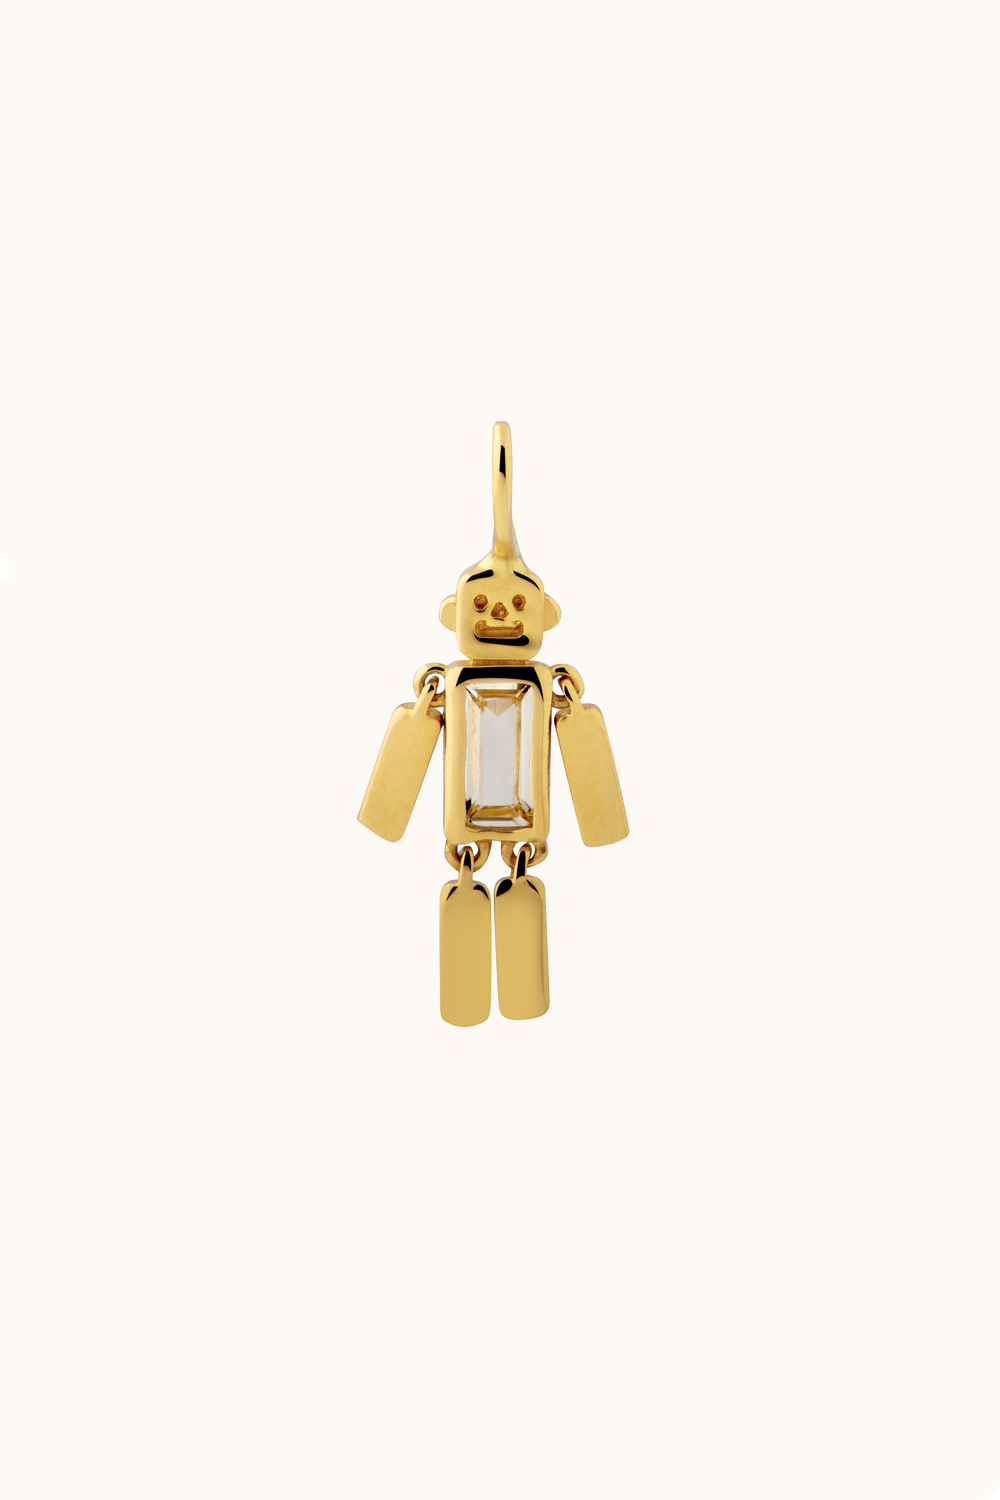 The Fine Gold Robot Charm 